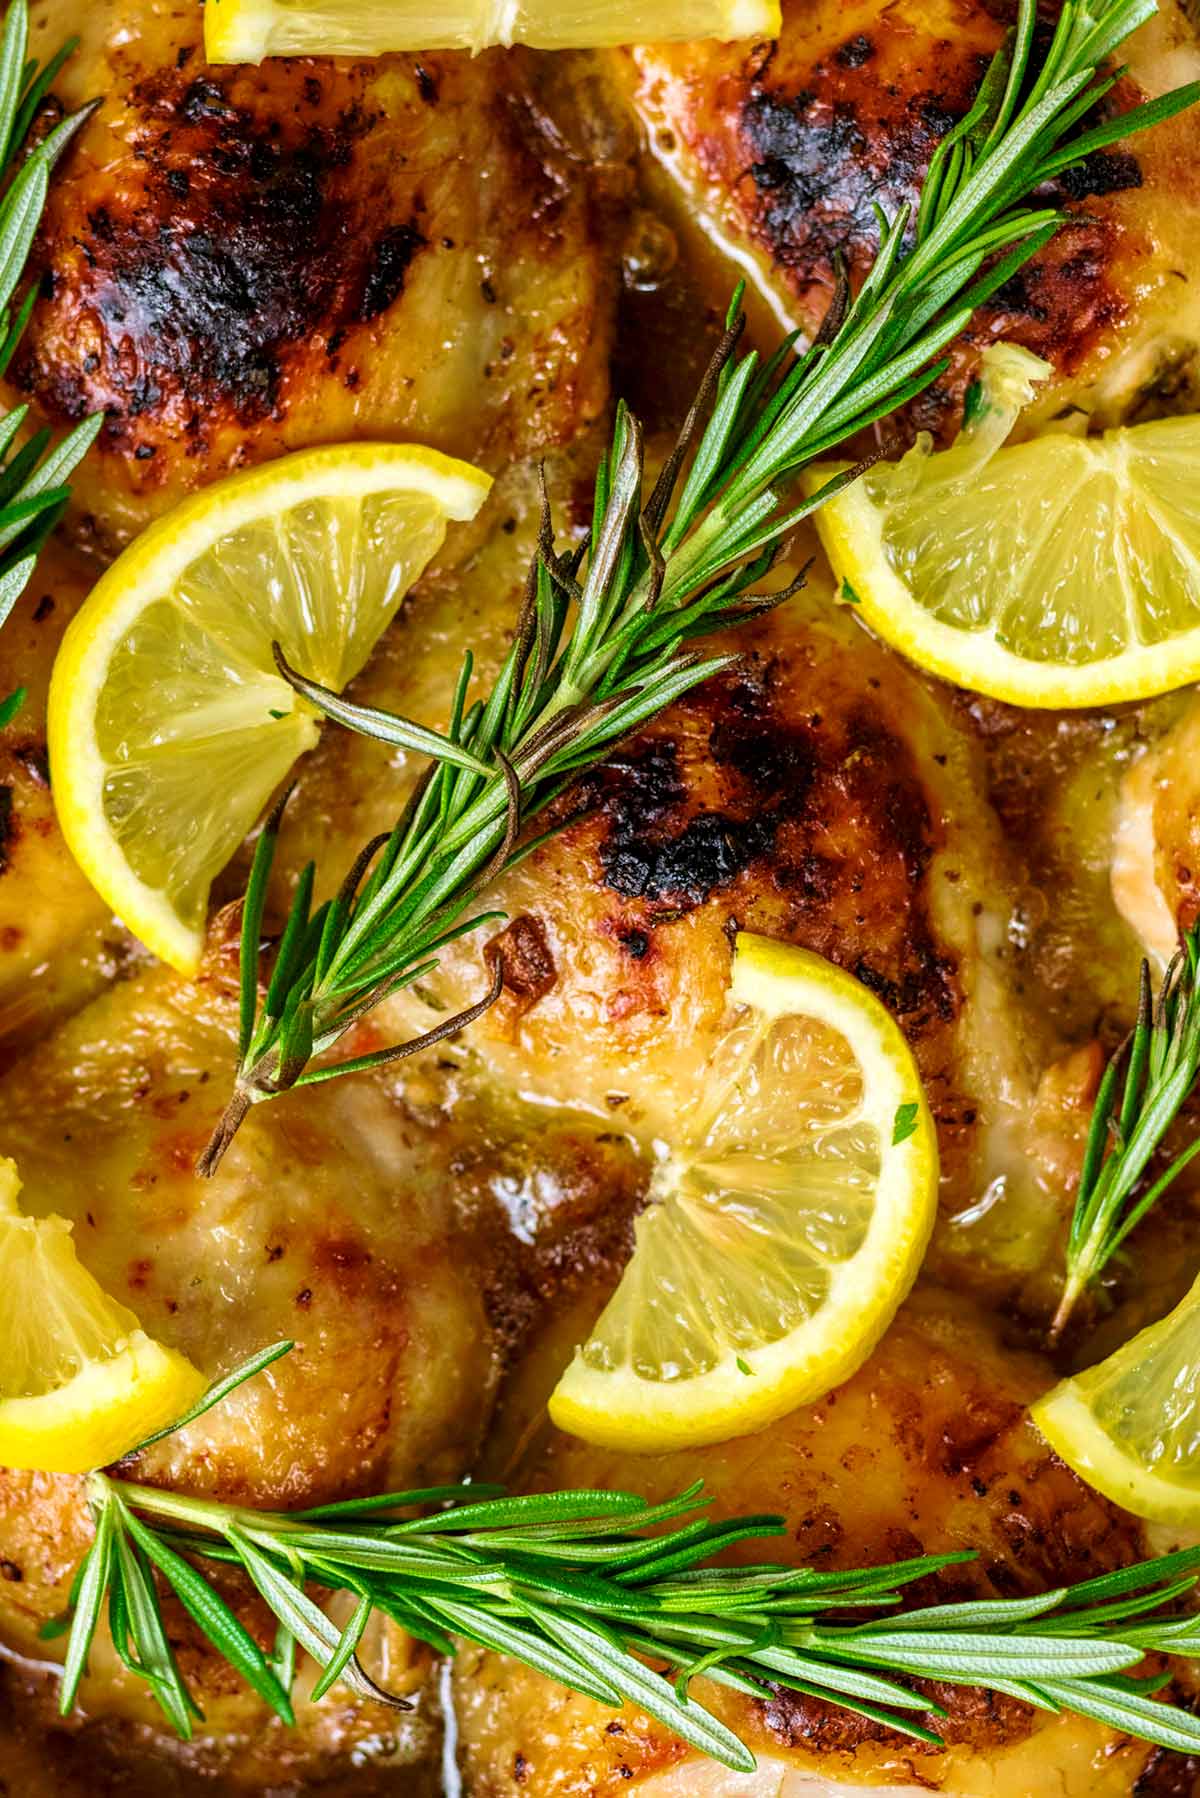 Slices of lemon and sprigs of rosemary on top of cooked chicken.